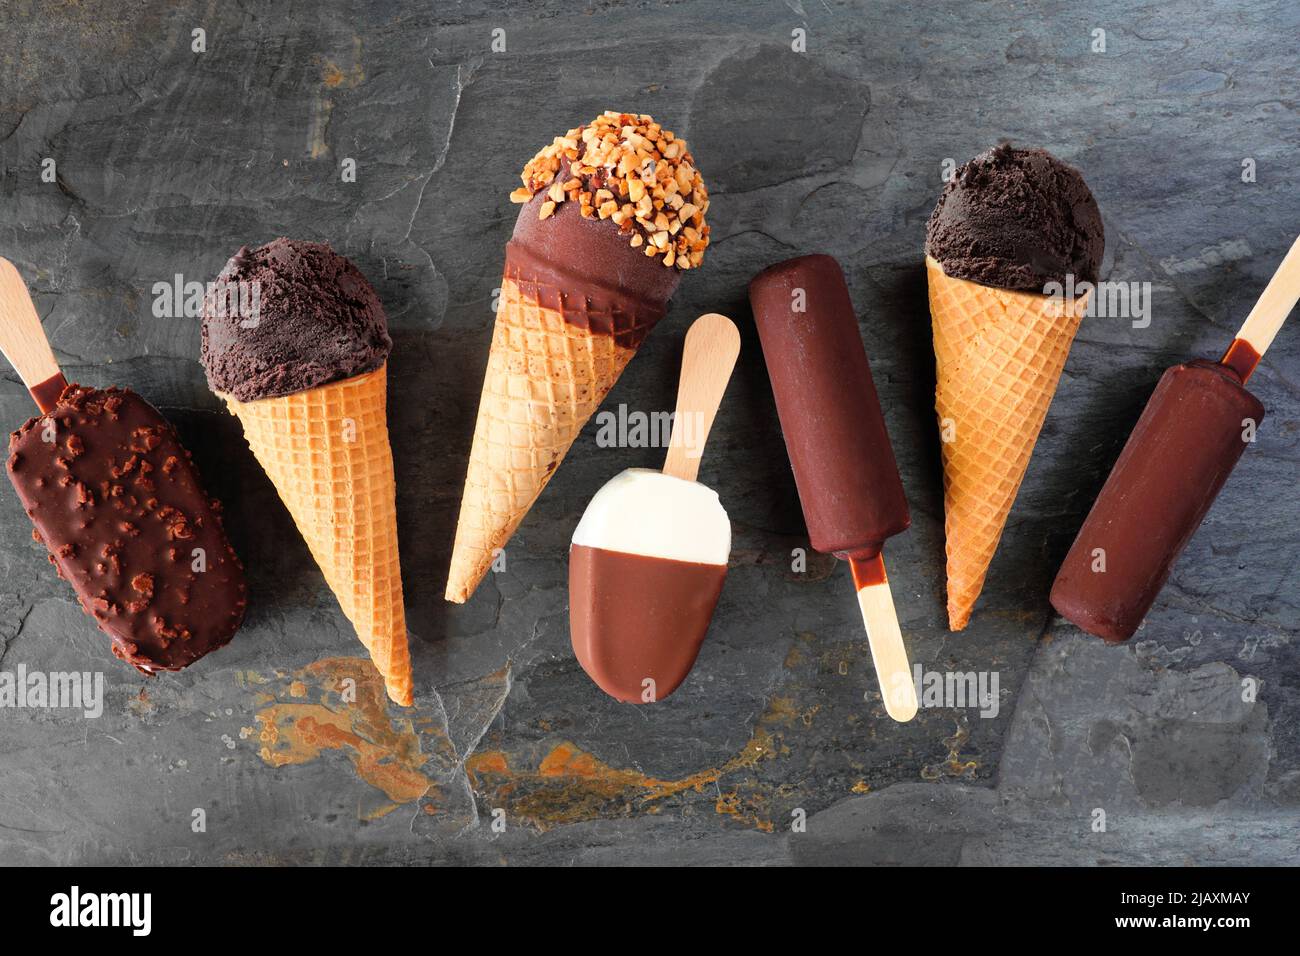 Variety of chocolate ice cream desserts. Overhead view scattered on a dark slate background. Stock Photo